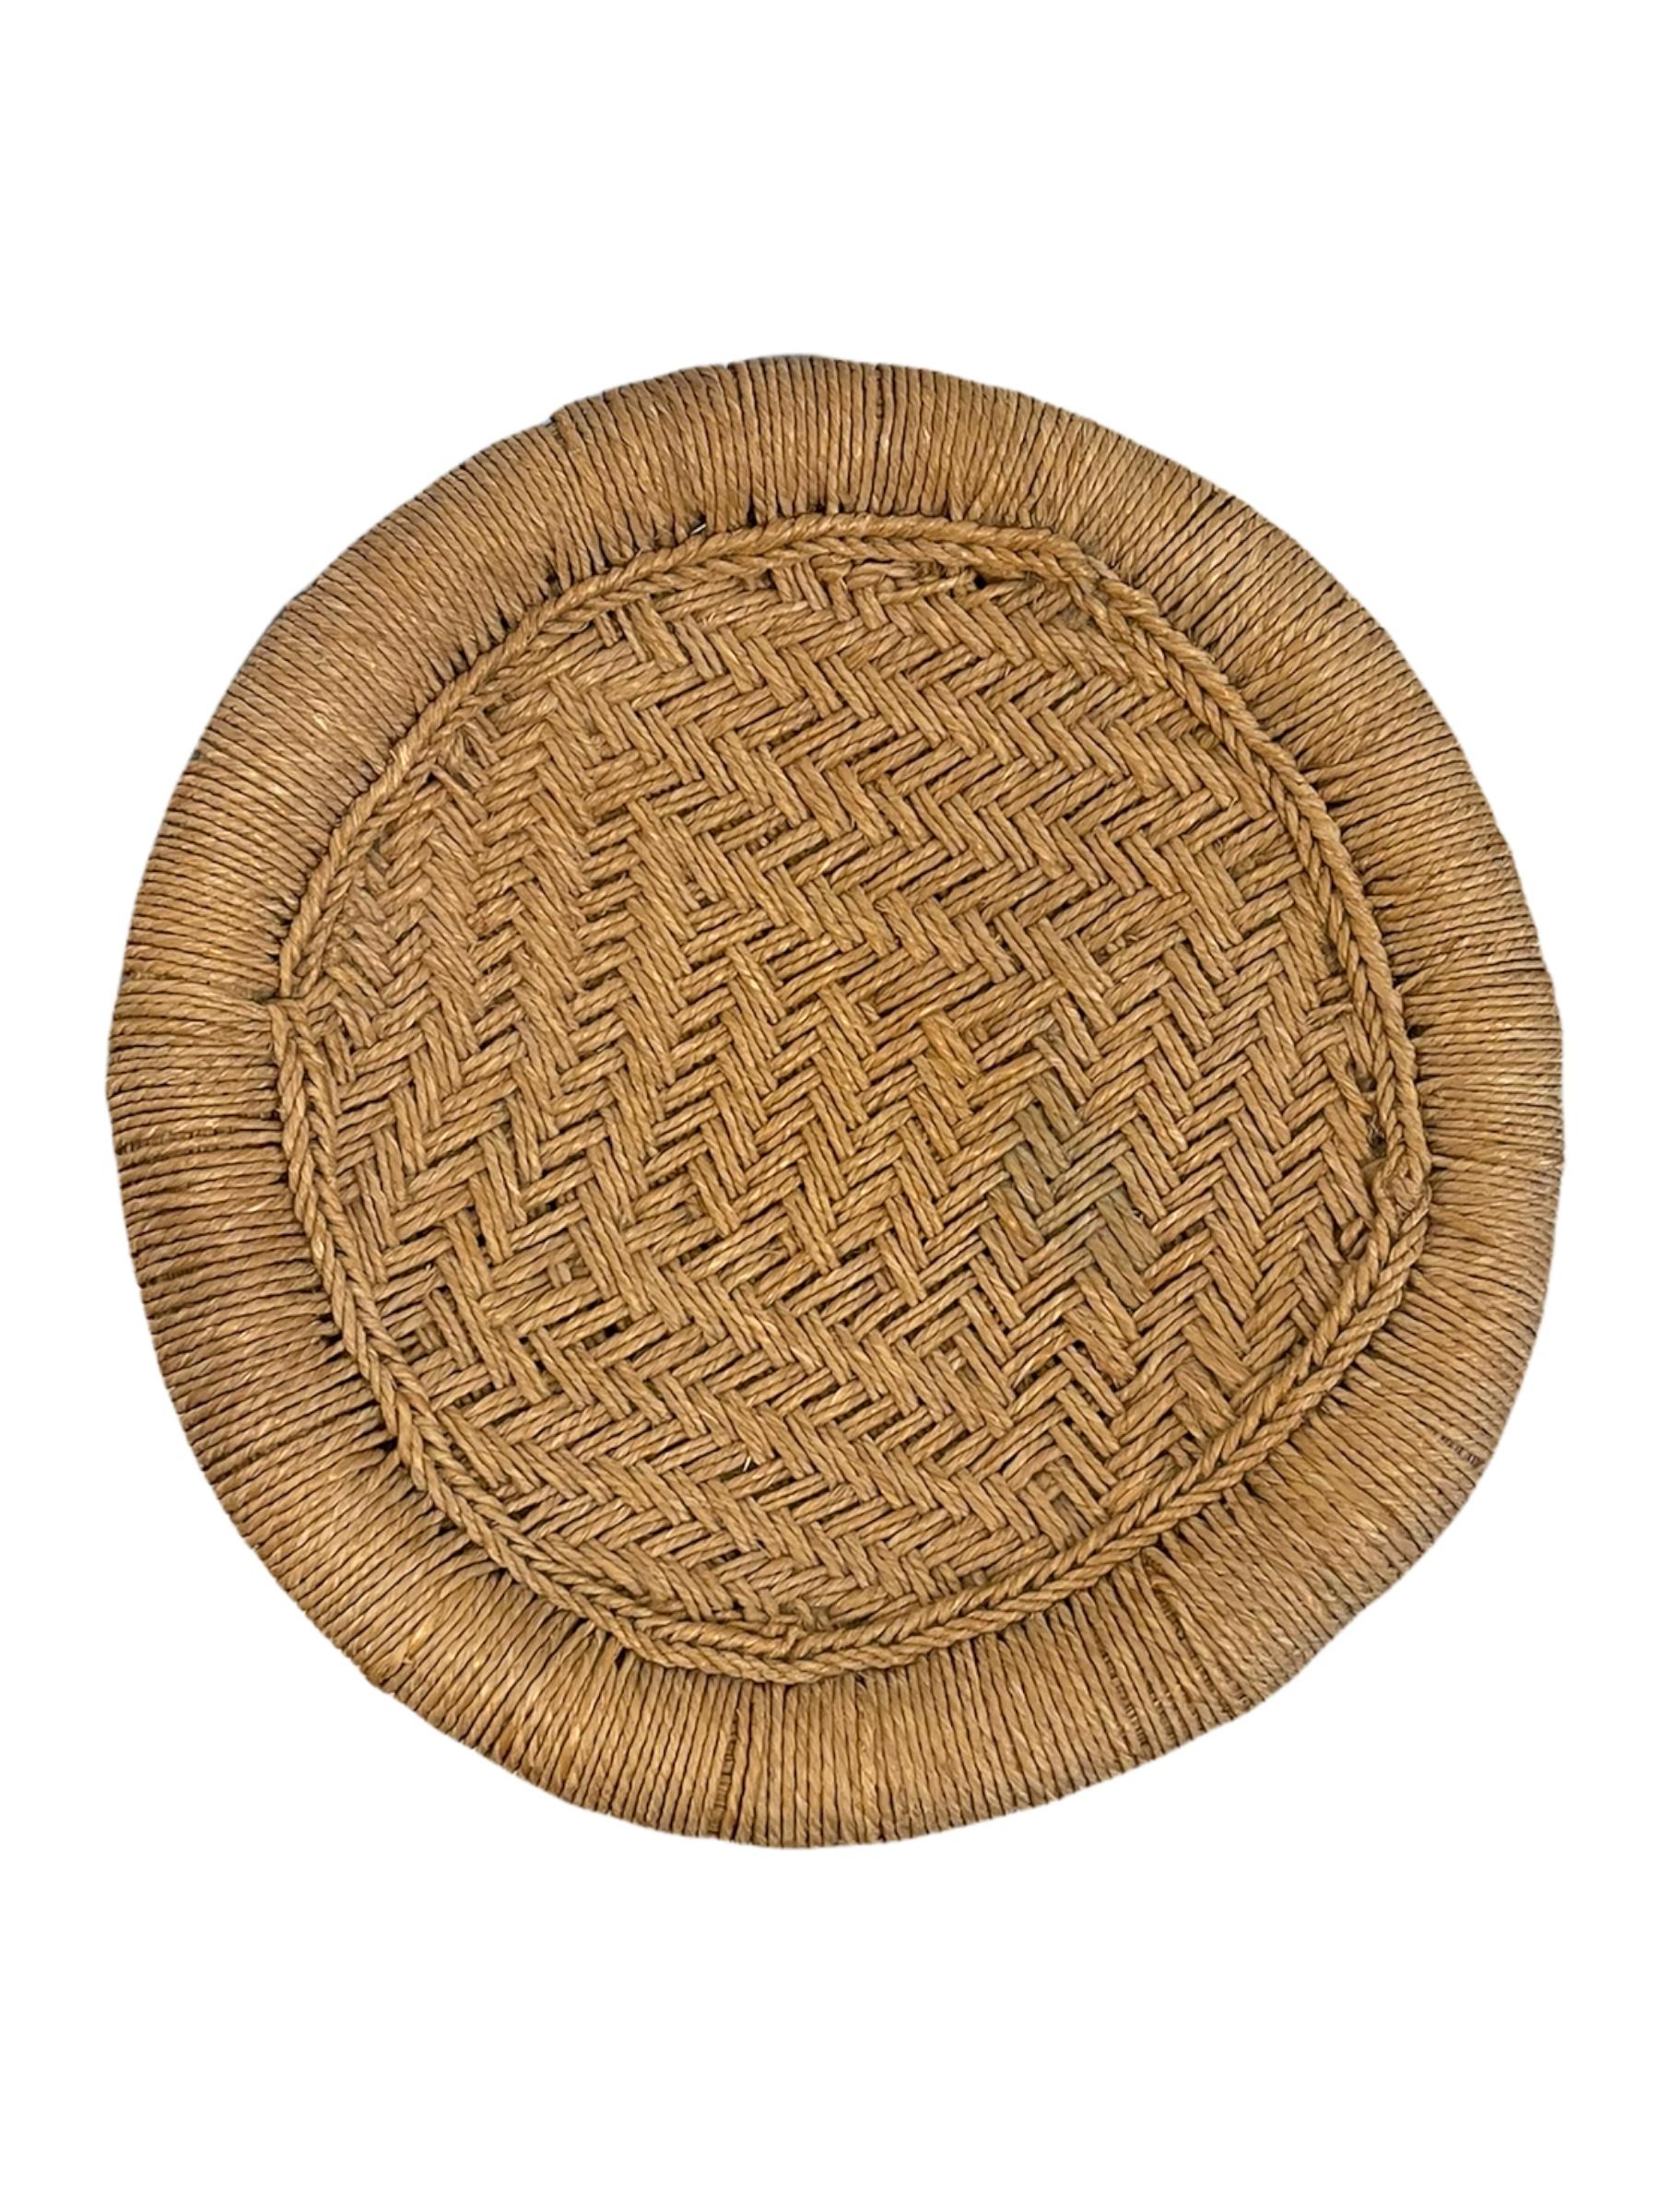 Hand-Woven Rattan and Rope Stool For Sale